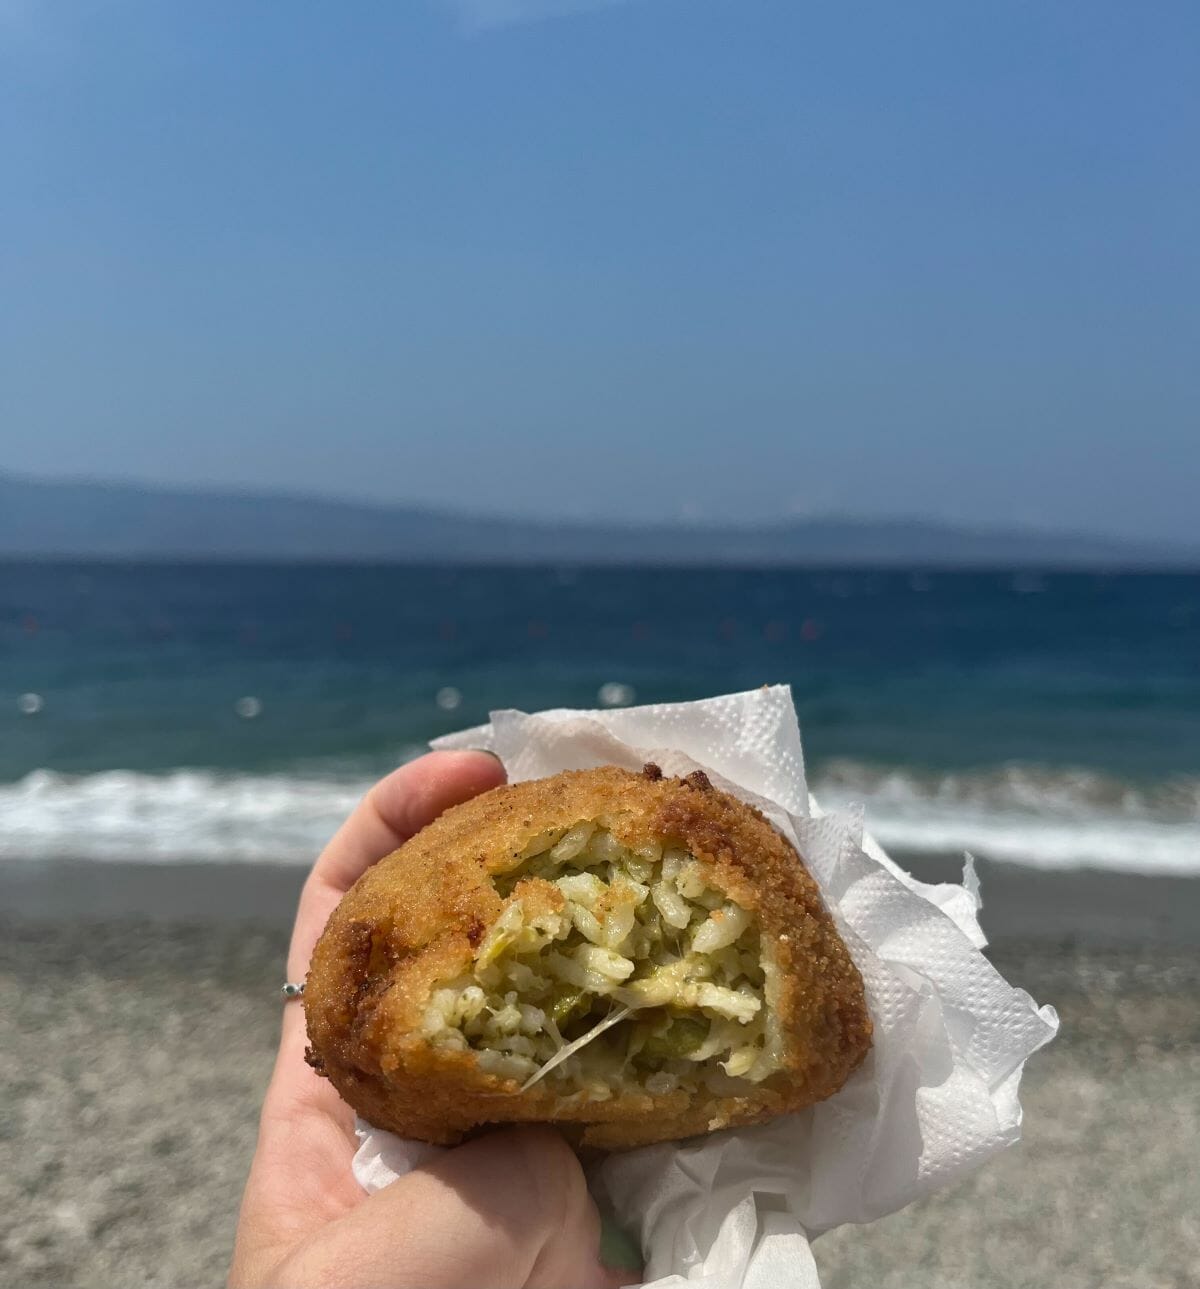 A ball of fried rice, arancini, with views of the ocean in the back